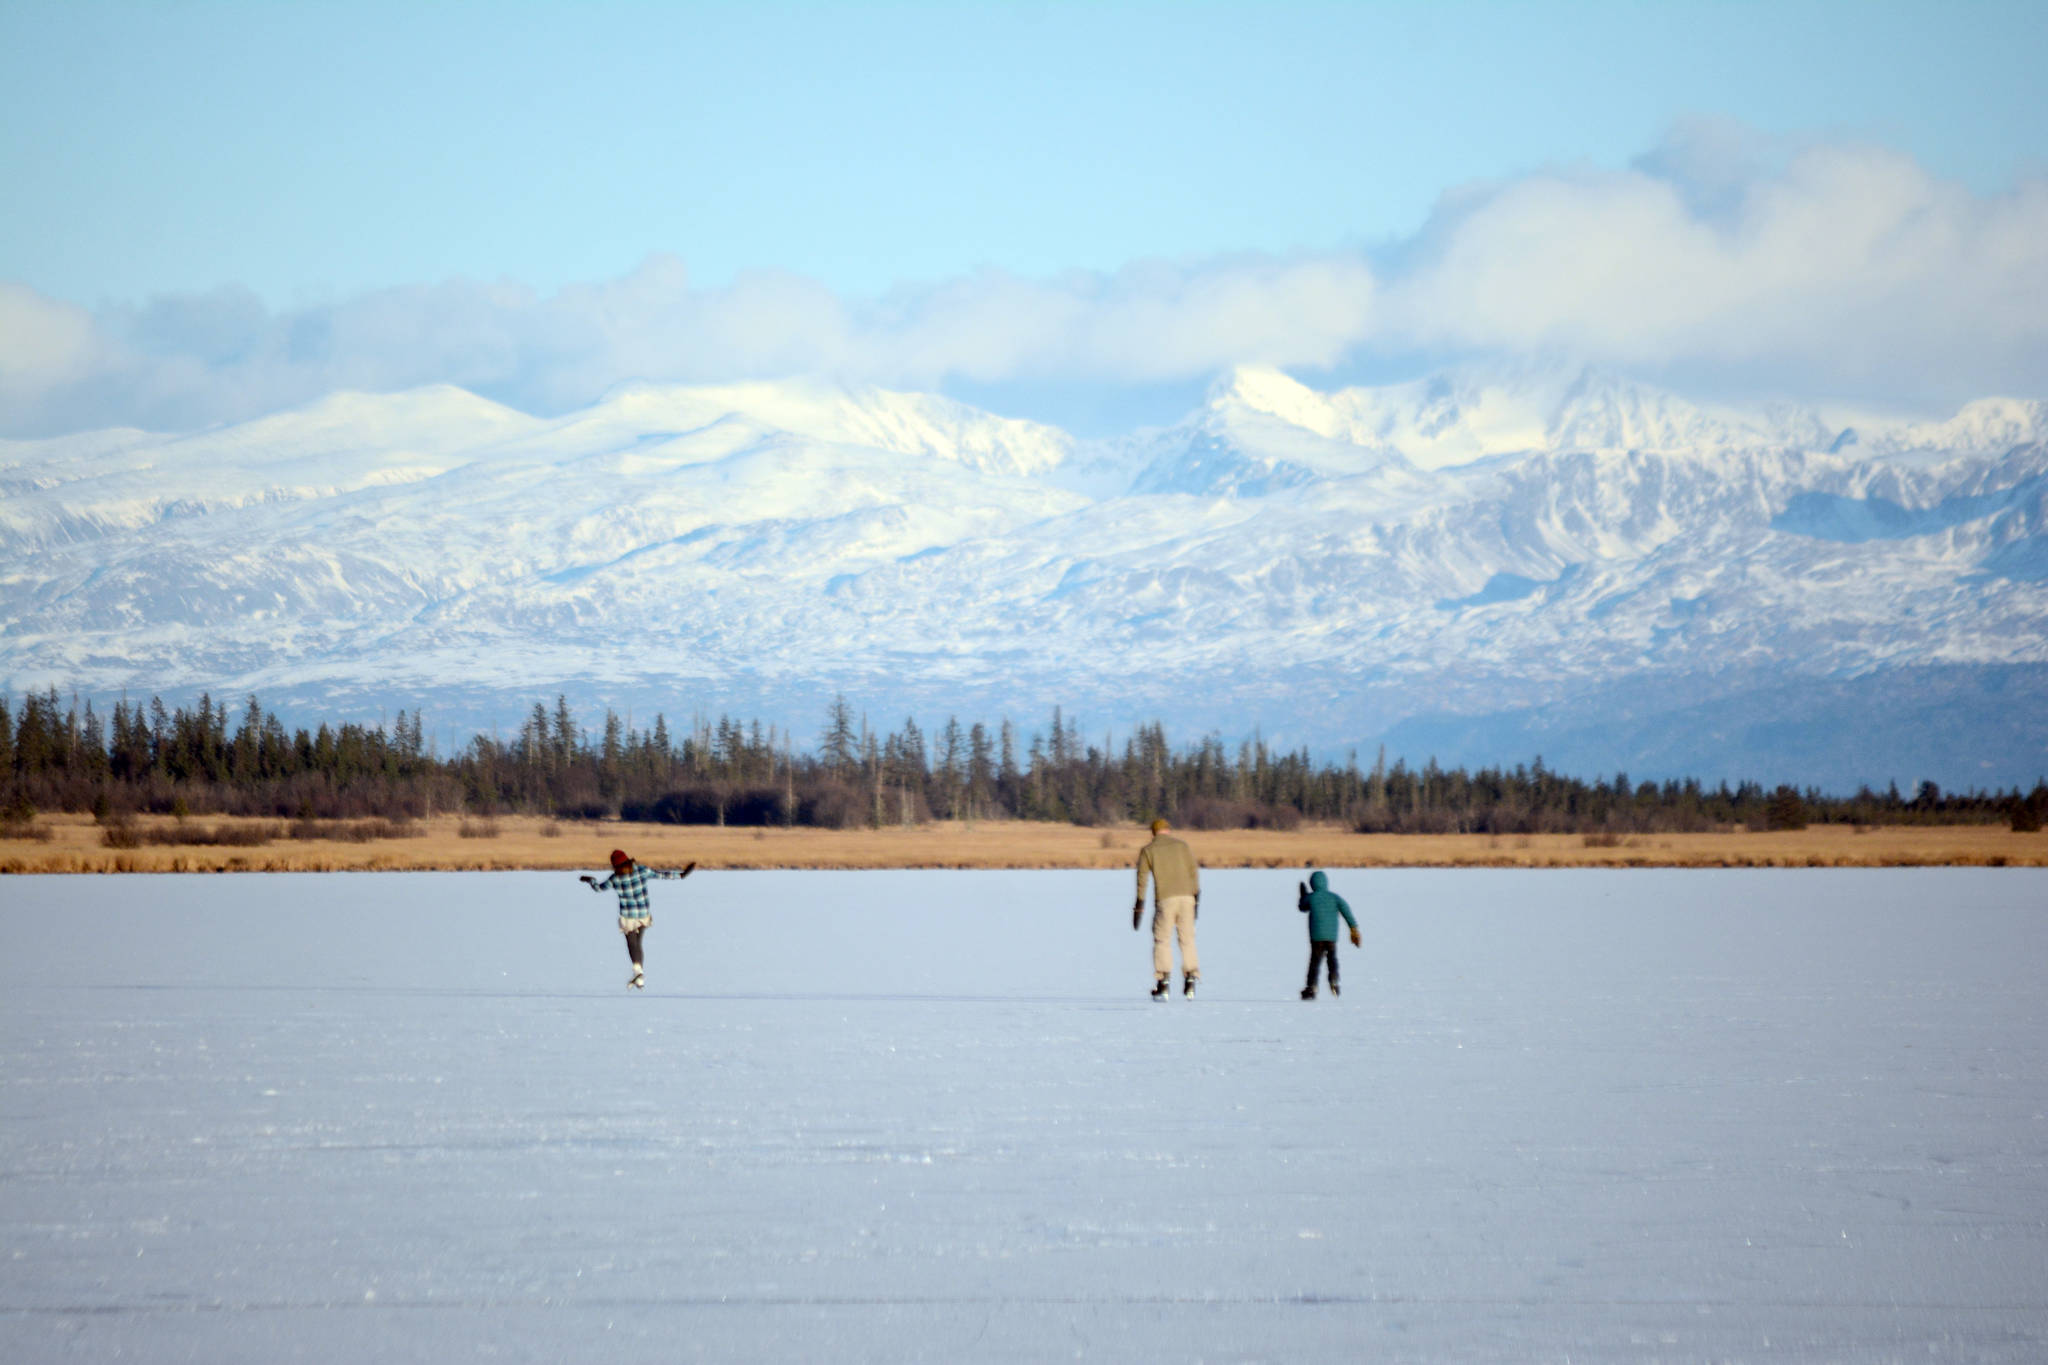 Skaters glide across Beluga Lake last Friday afternoon, Nov. 17, 2017 in Homer, Alaska. With clear and cold weather, the lake has frozen enough to support ice skating. A slight dusting of snow last Thursday didn’t affect skating. (Photo by Michael Armstrong, Homer News)